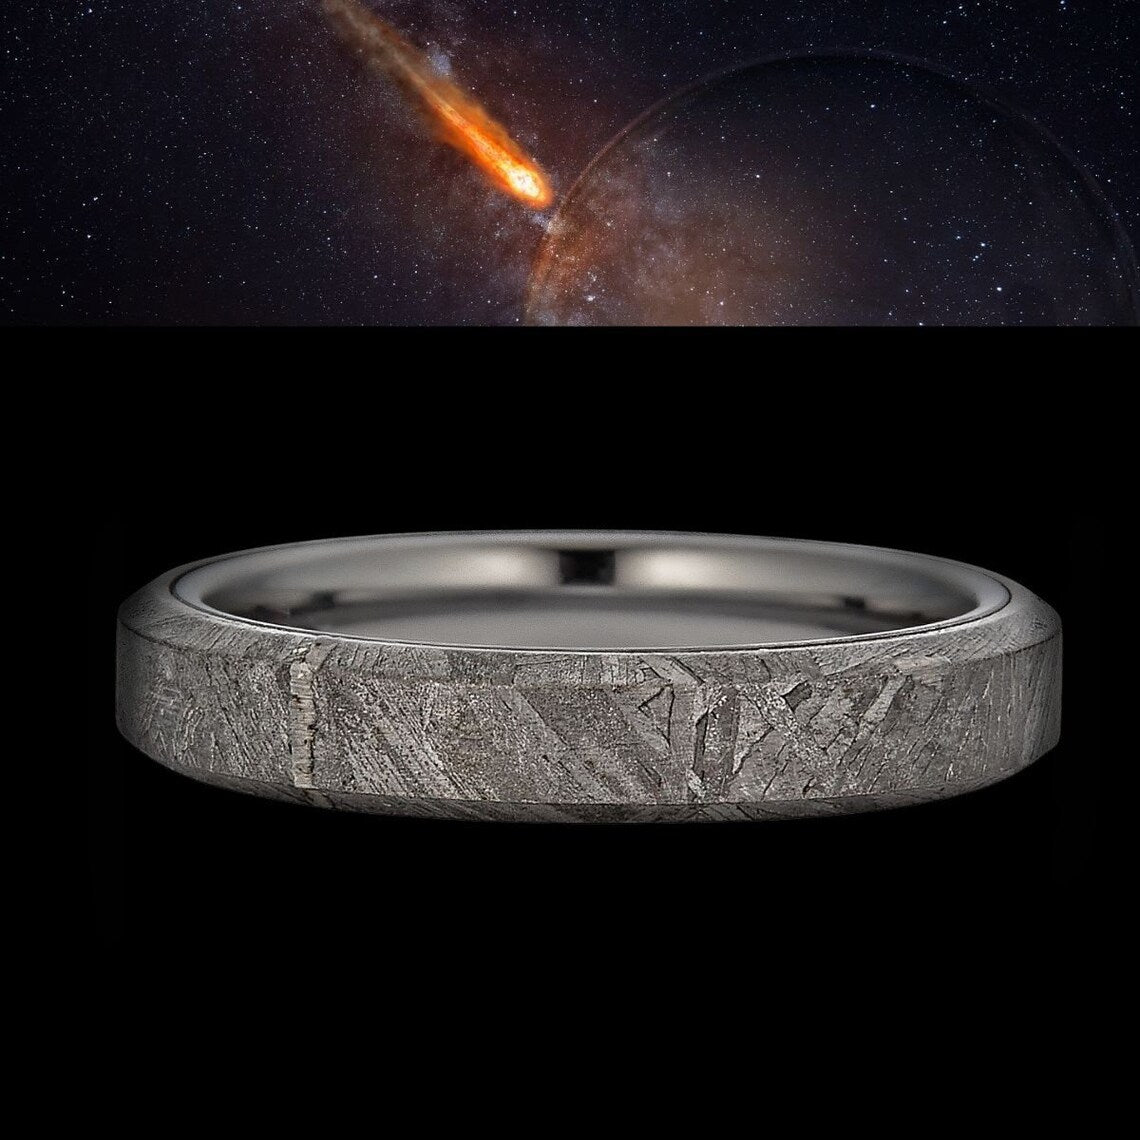 Real Muonionalusta Meteorite Ring with Tungsten – 4mm Comfort Fit Wedding Ring Highly Durable Tungsten Band FREE ENGRAVING